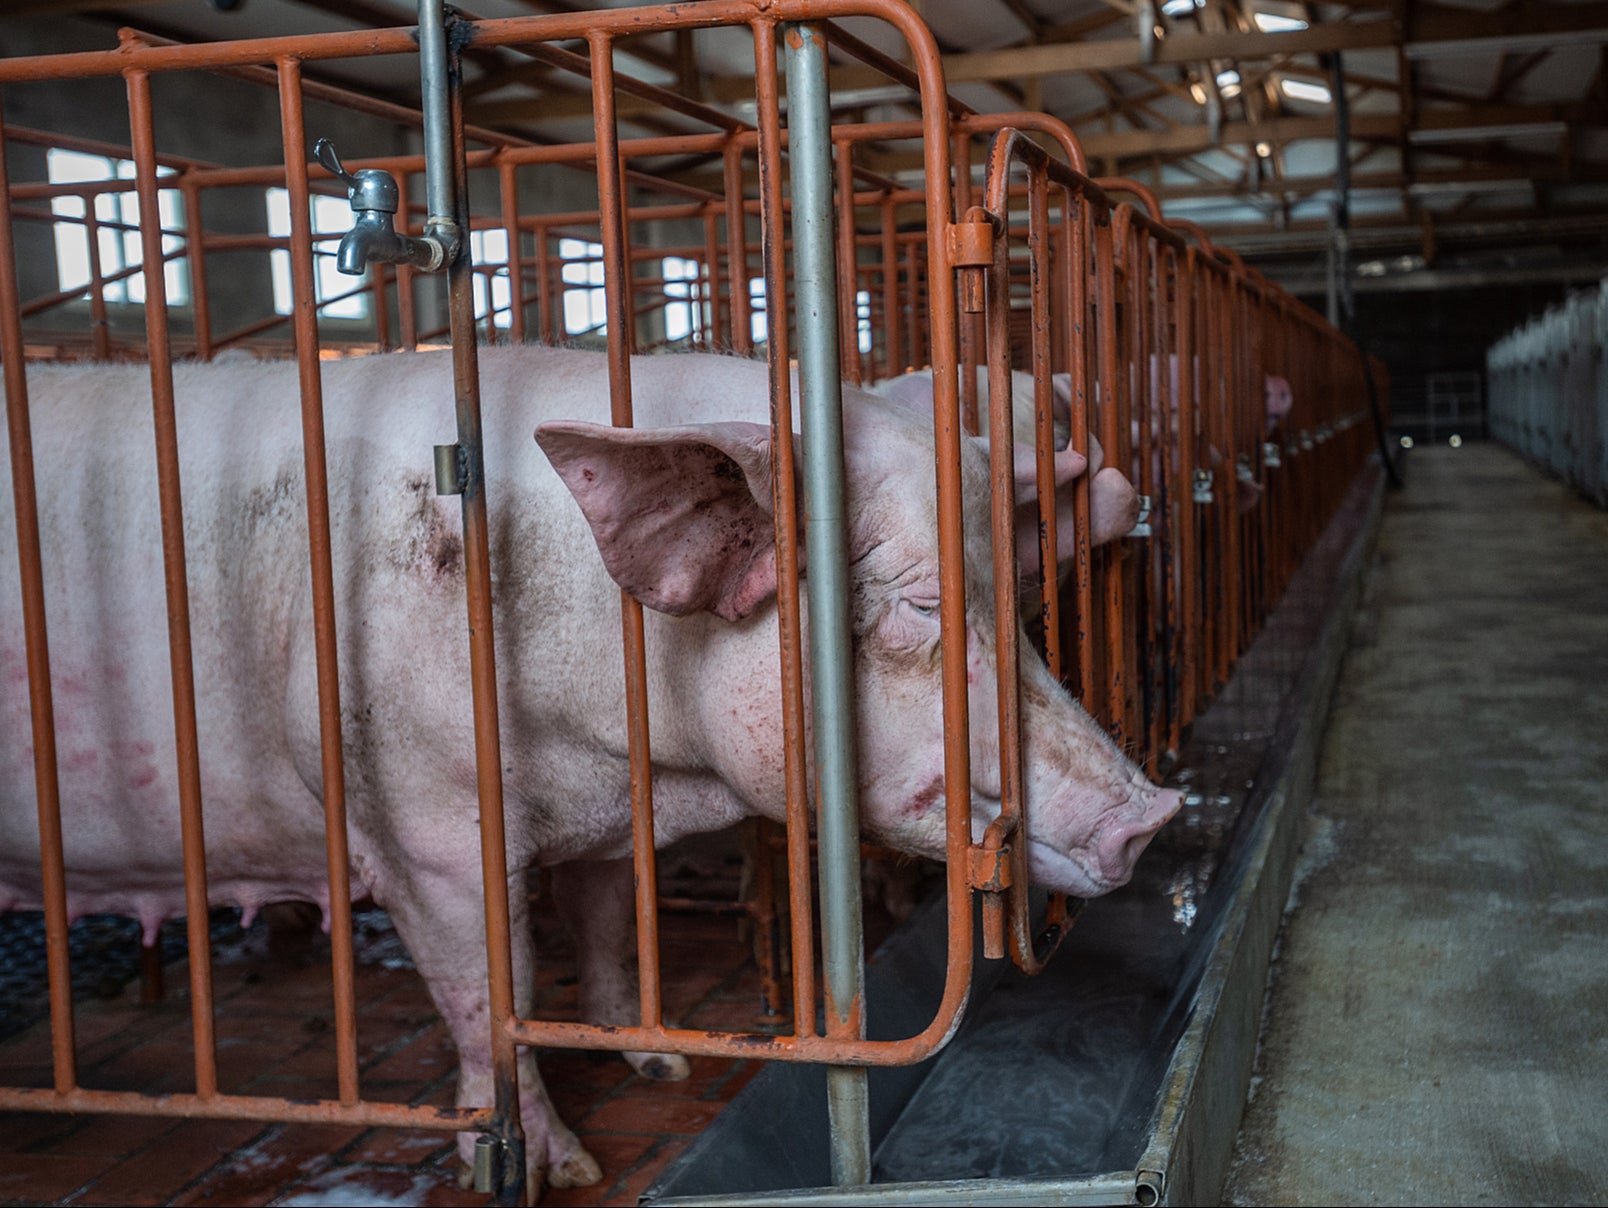 Britain banned sow stalls 22 years ago but they are still widely used in other countries